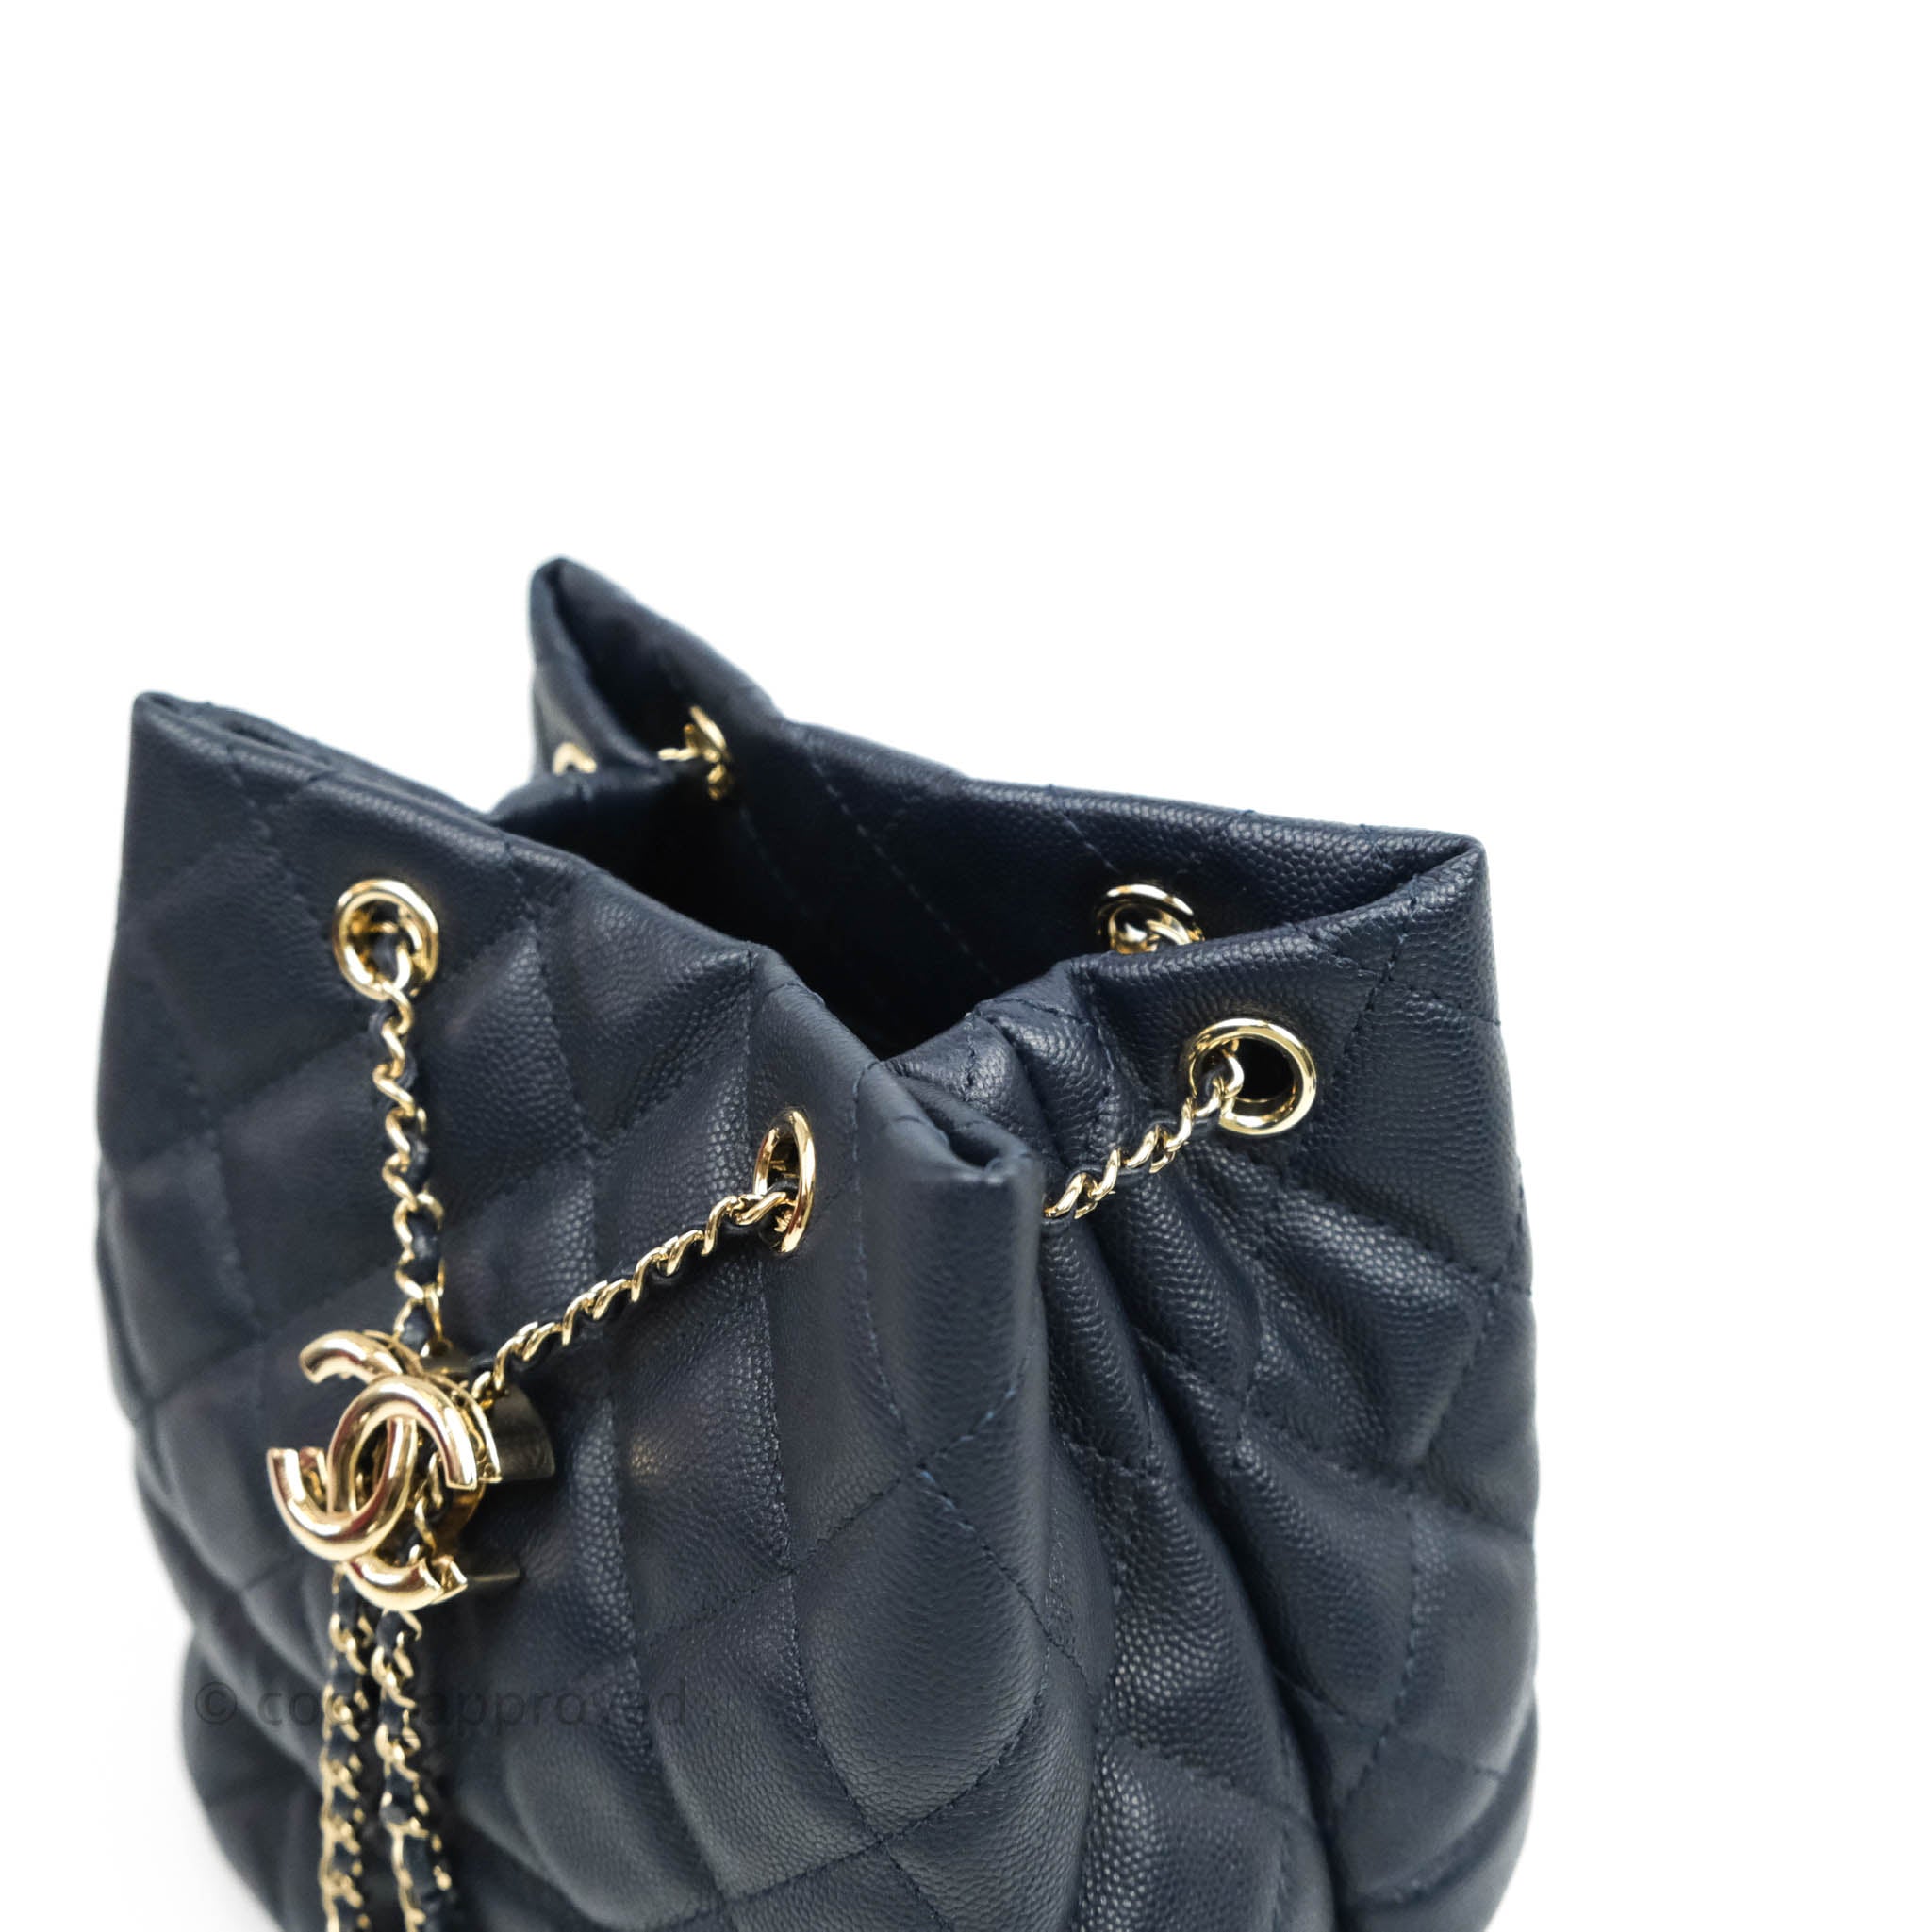 Chanel Caviar Quilted Rolled Up Bucket Drawstring Bag Navy Gold Hardwa – Coco  Approved Studio